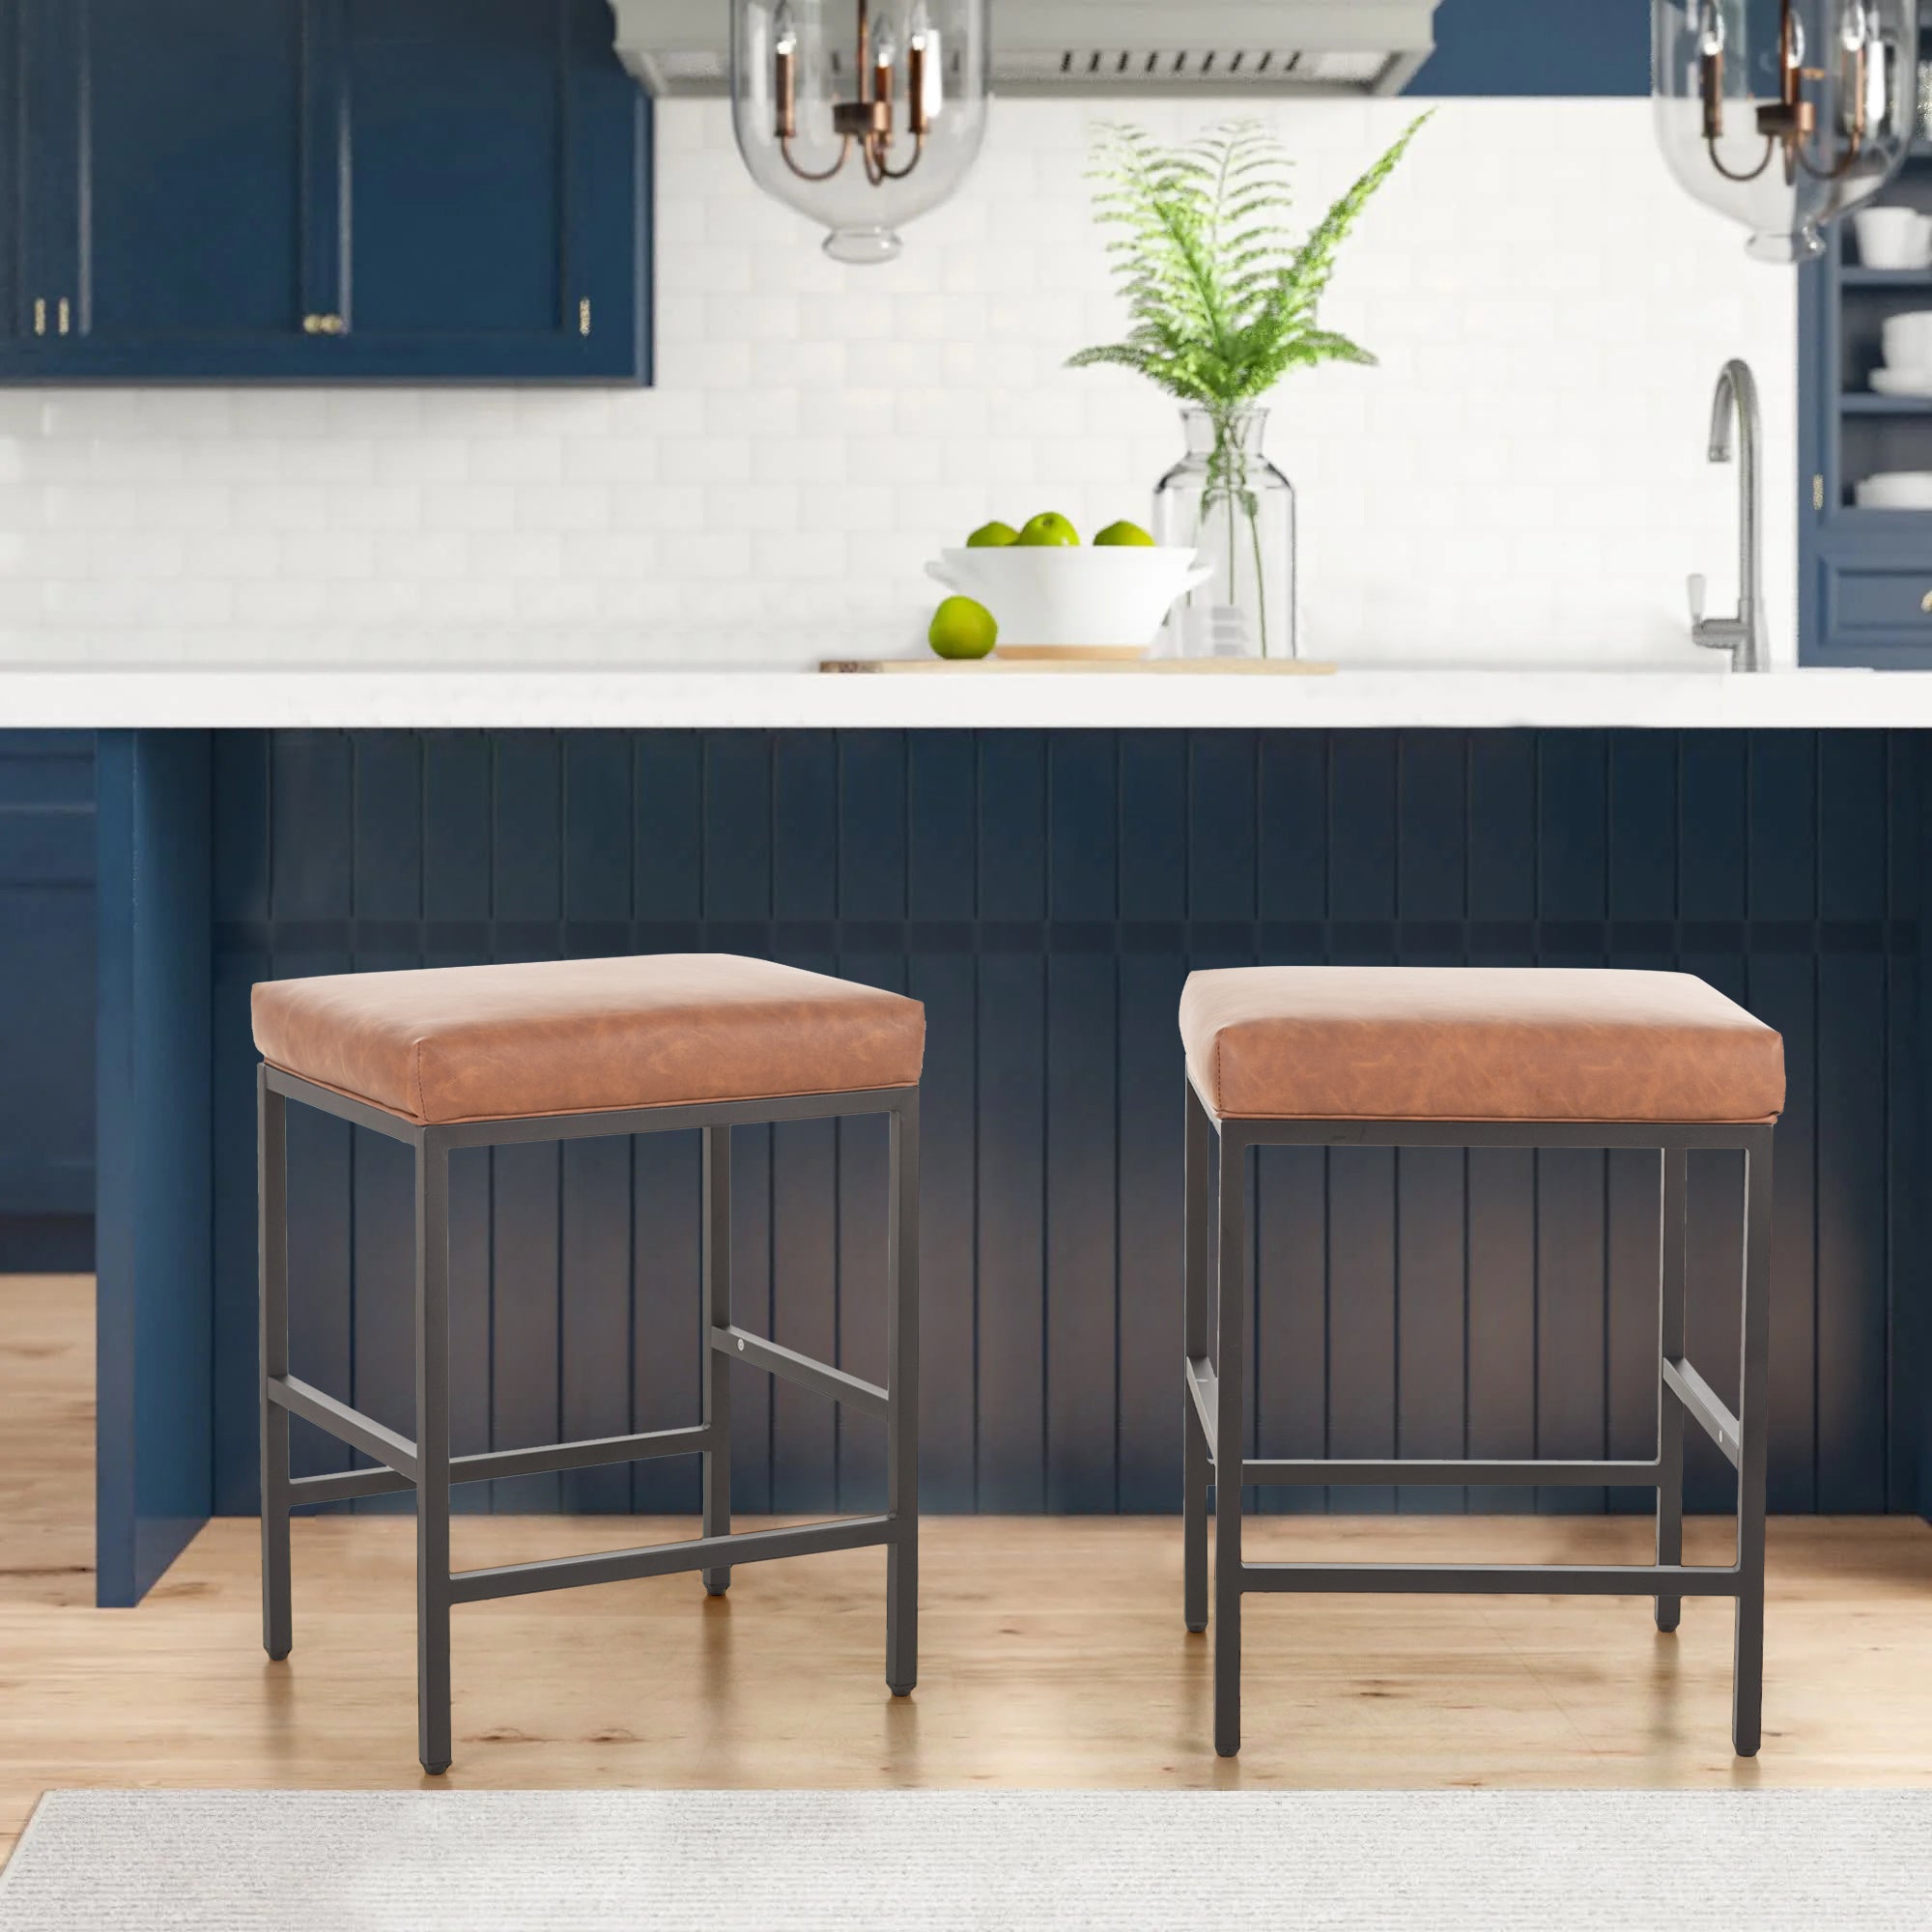 PHI VILLA Square Counter Height Bar Stools with Water-Proof PU Leather Seat